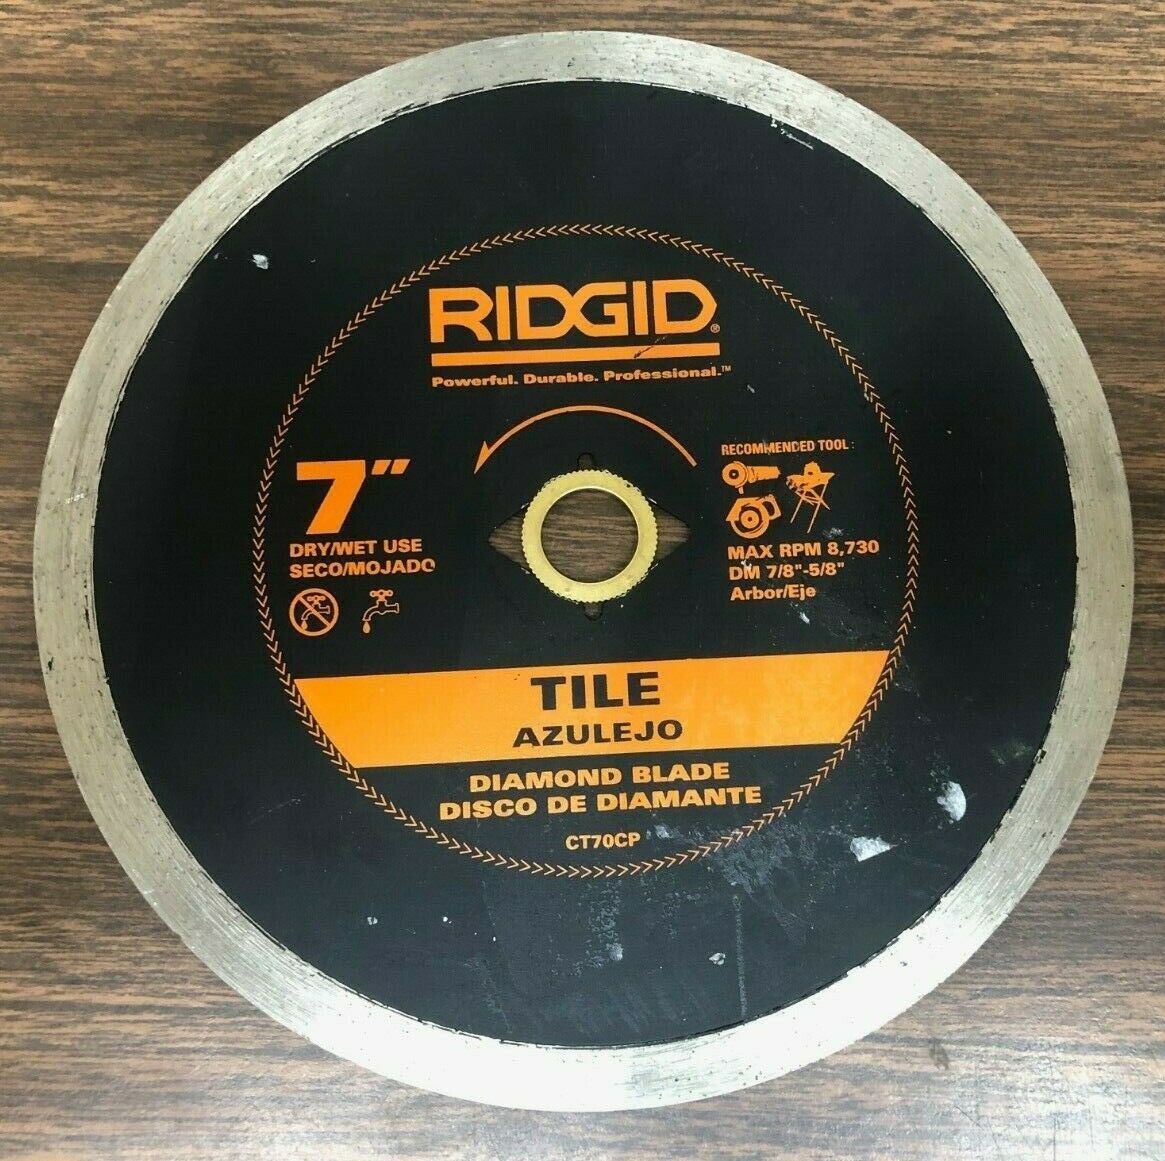 Primary image for Ridgid 7 in. Continuous Diamond Blade, Tile CT70CP